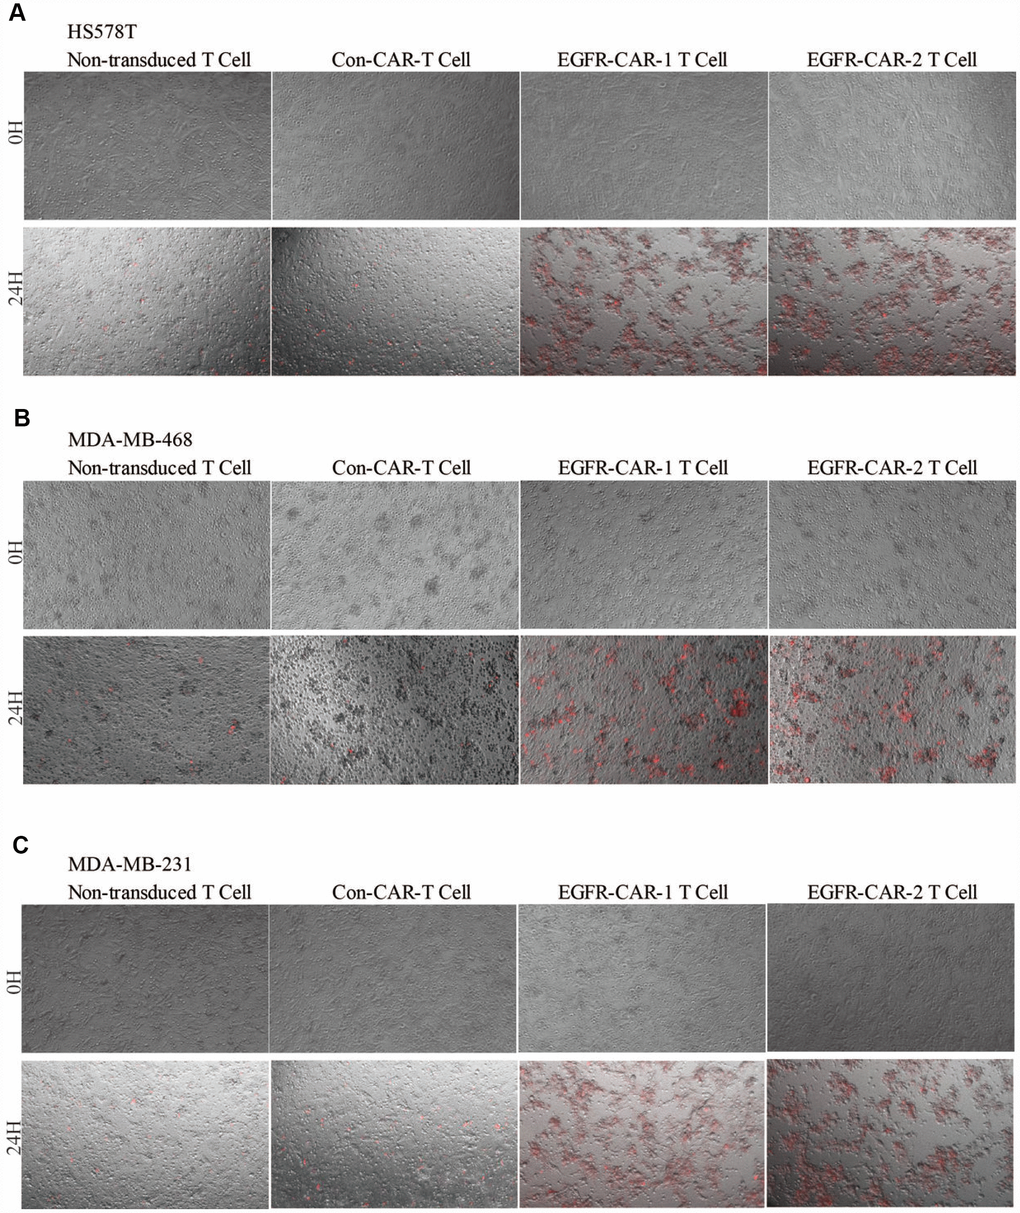 TNBC cell lysis assay. (A) HS578T, (B) MDA-MB-468, and (C) MDA-MB-231 cells were labeled with YOYO-3 (red). Non-transduced T cells, con-CAR-T cells, EGFR-CAR-1 T cells, and EGFR-CAR-2 T effector cells were co-cultured with target cells at an E:T ratio of 10:1 for 24h.